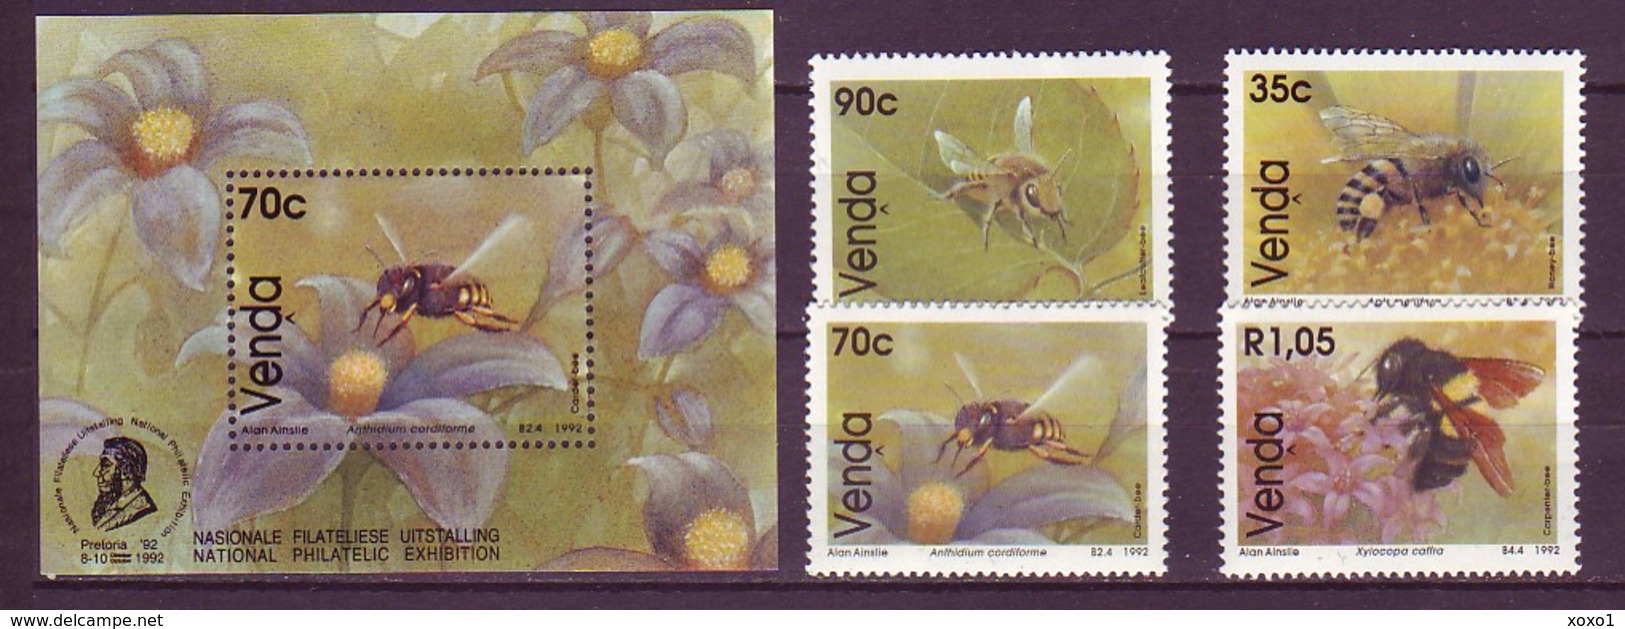 Venda South Africa 1992 MiNr. 237 - 241 (Block 8) Bees Honeybees Insects 4v+1 MNH** 13.00 € - Abejas